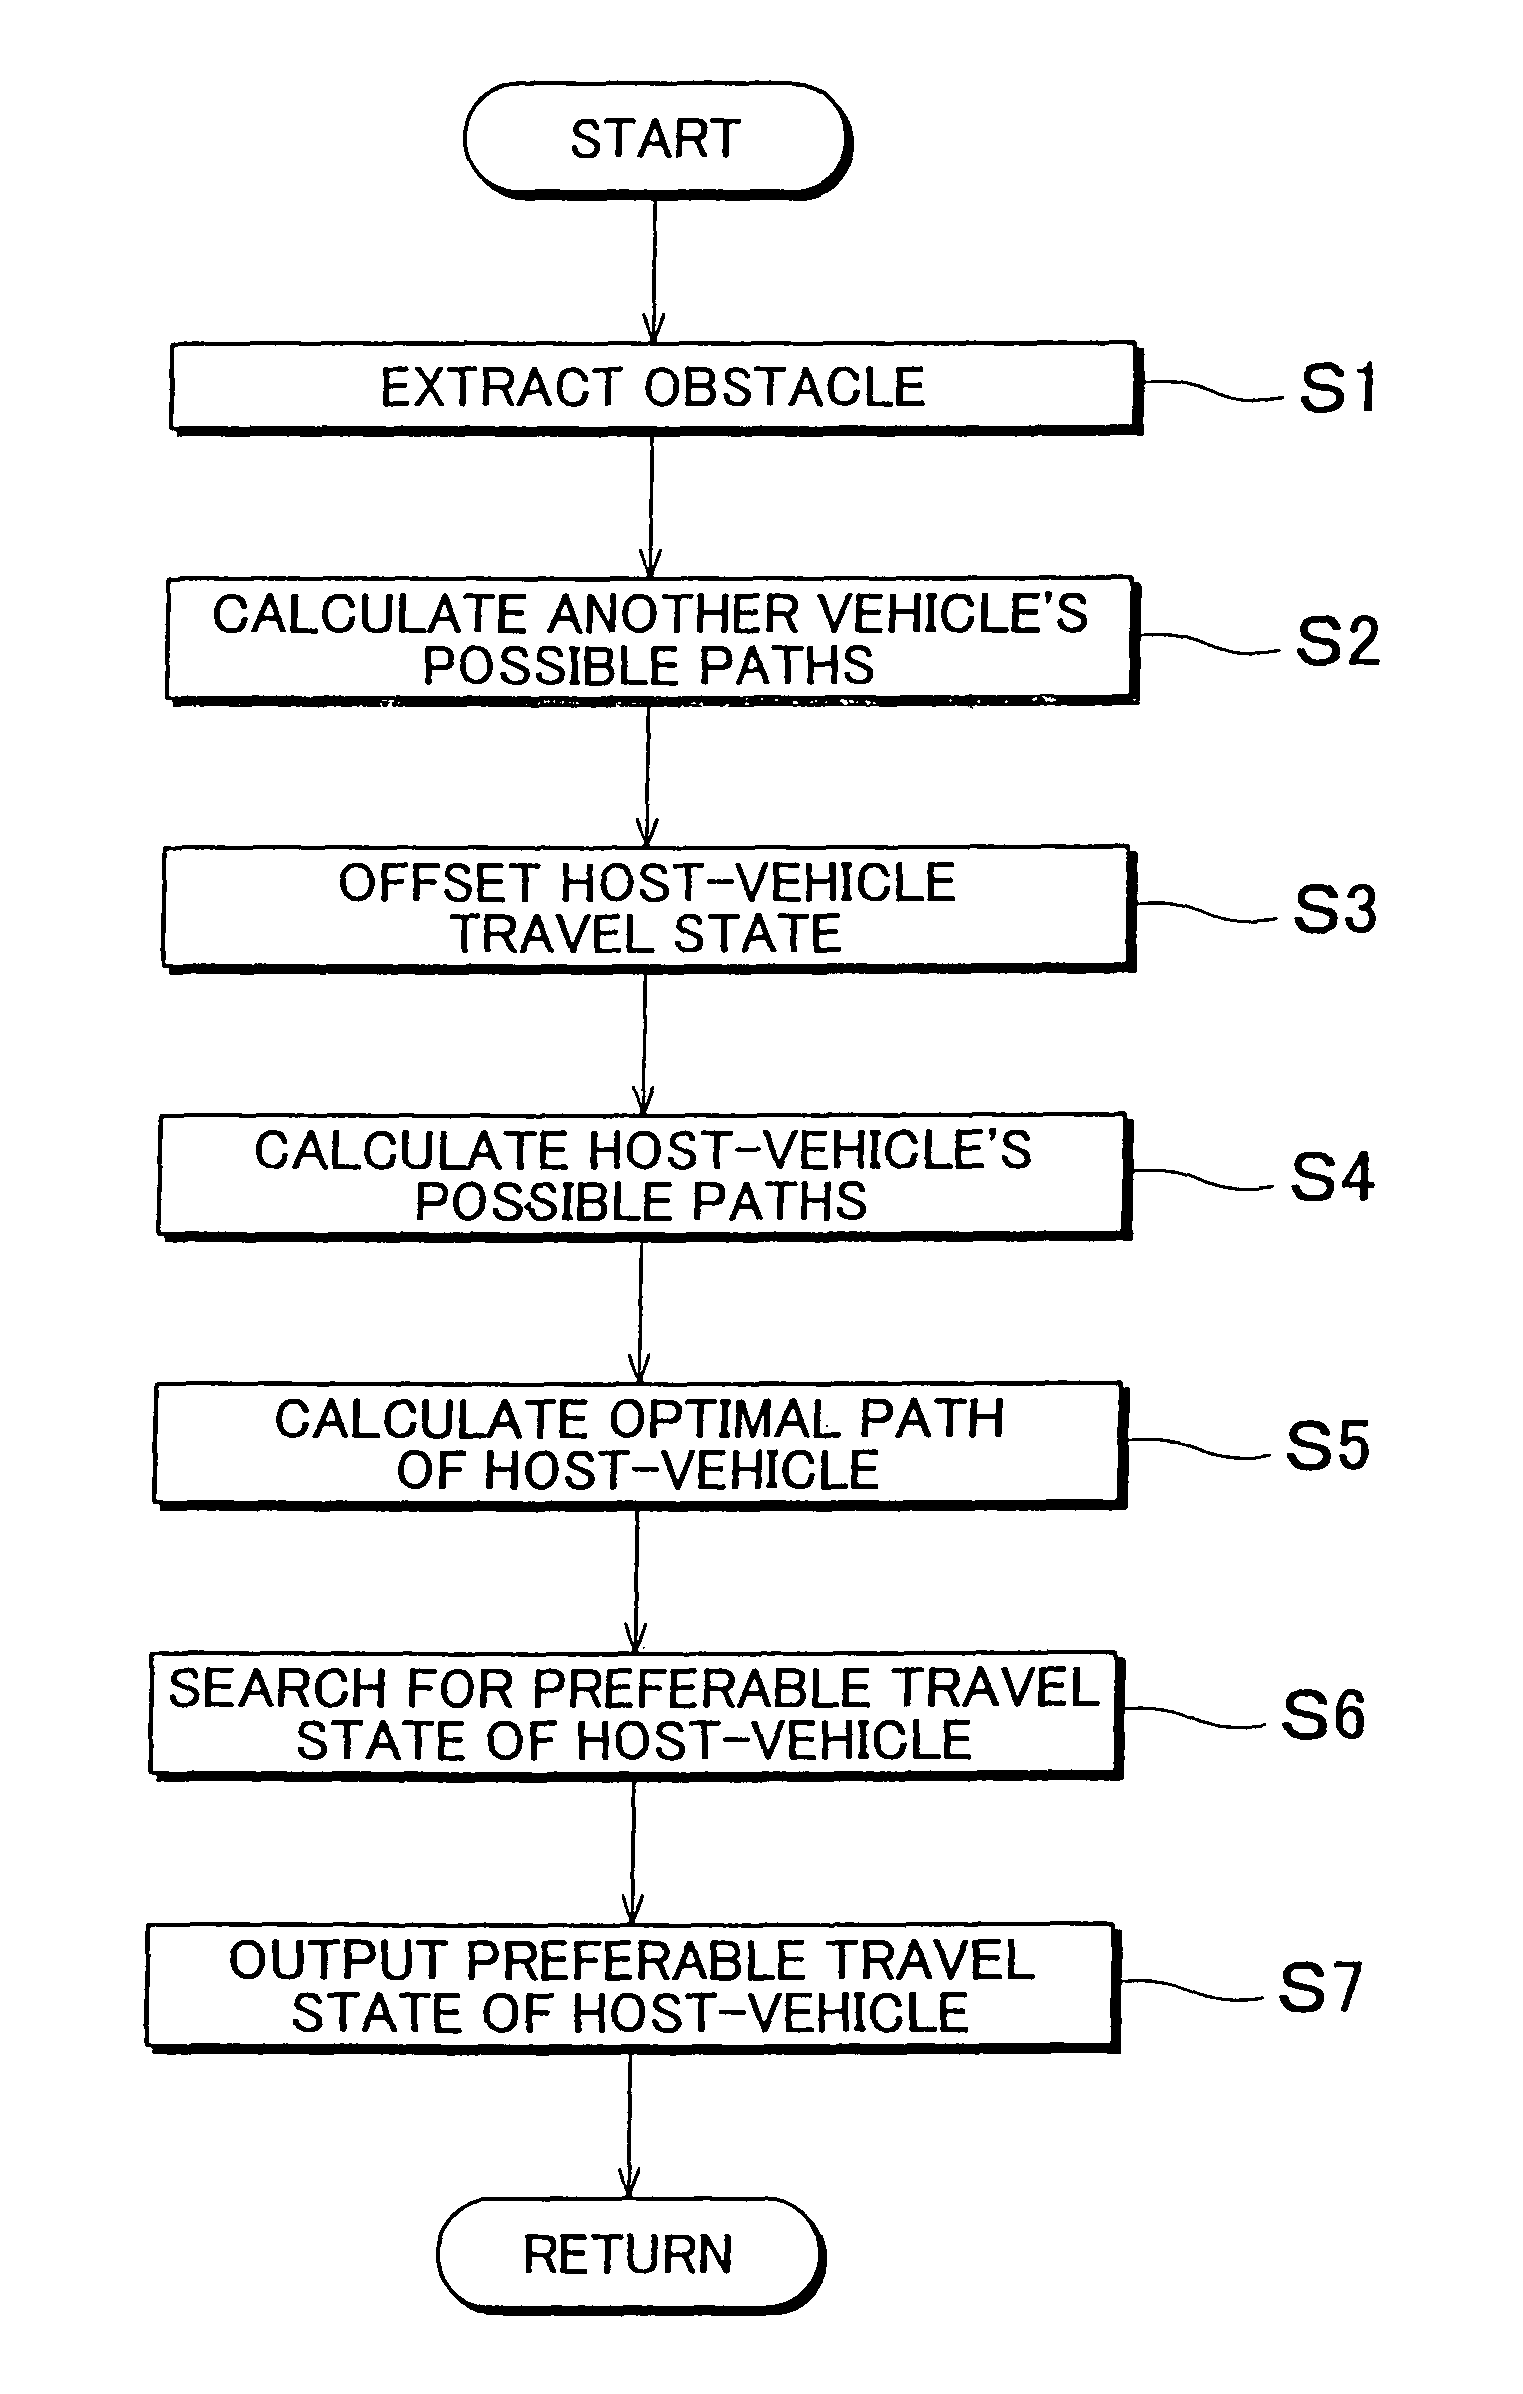 Host-vehicle risk acquisition device and method